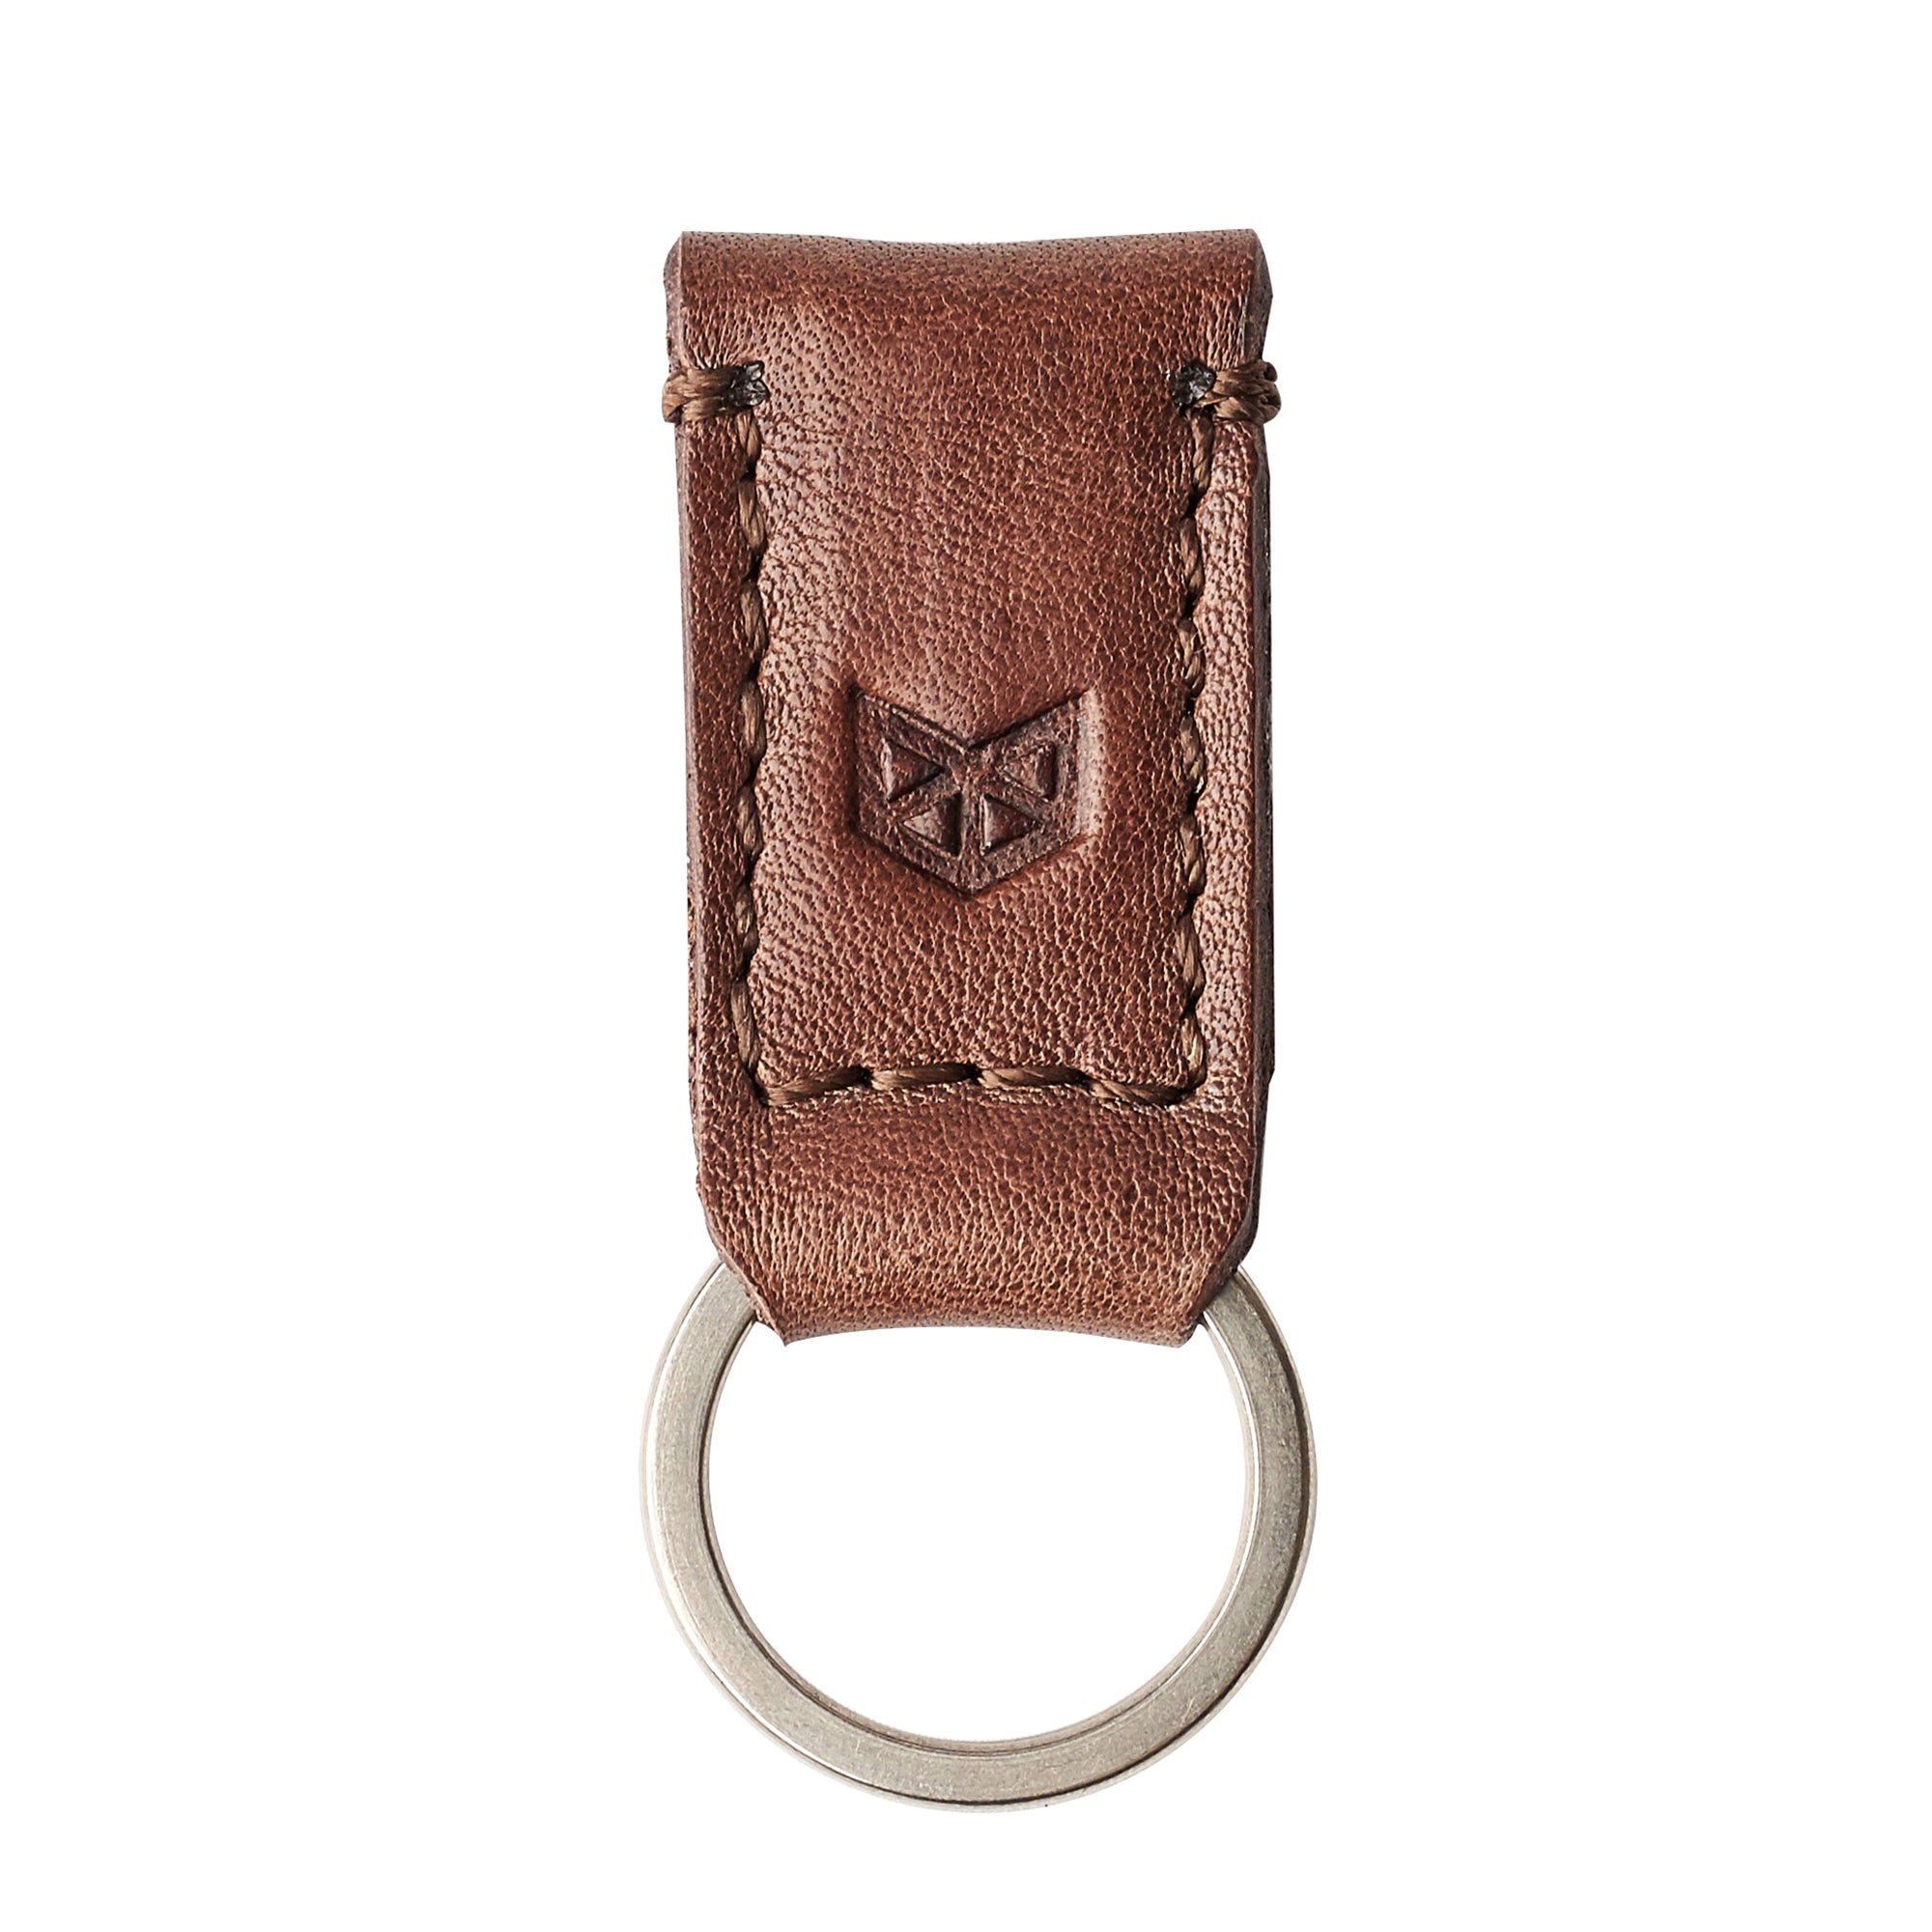 Brown leather keychain, magnetic key fob for mens gifts